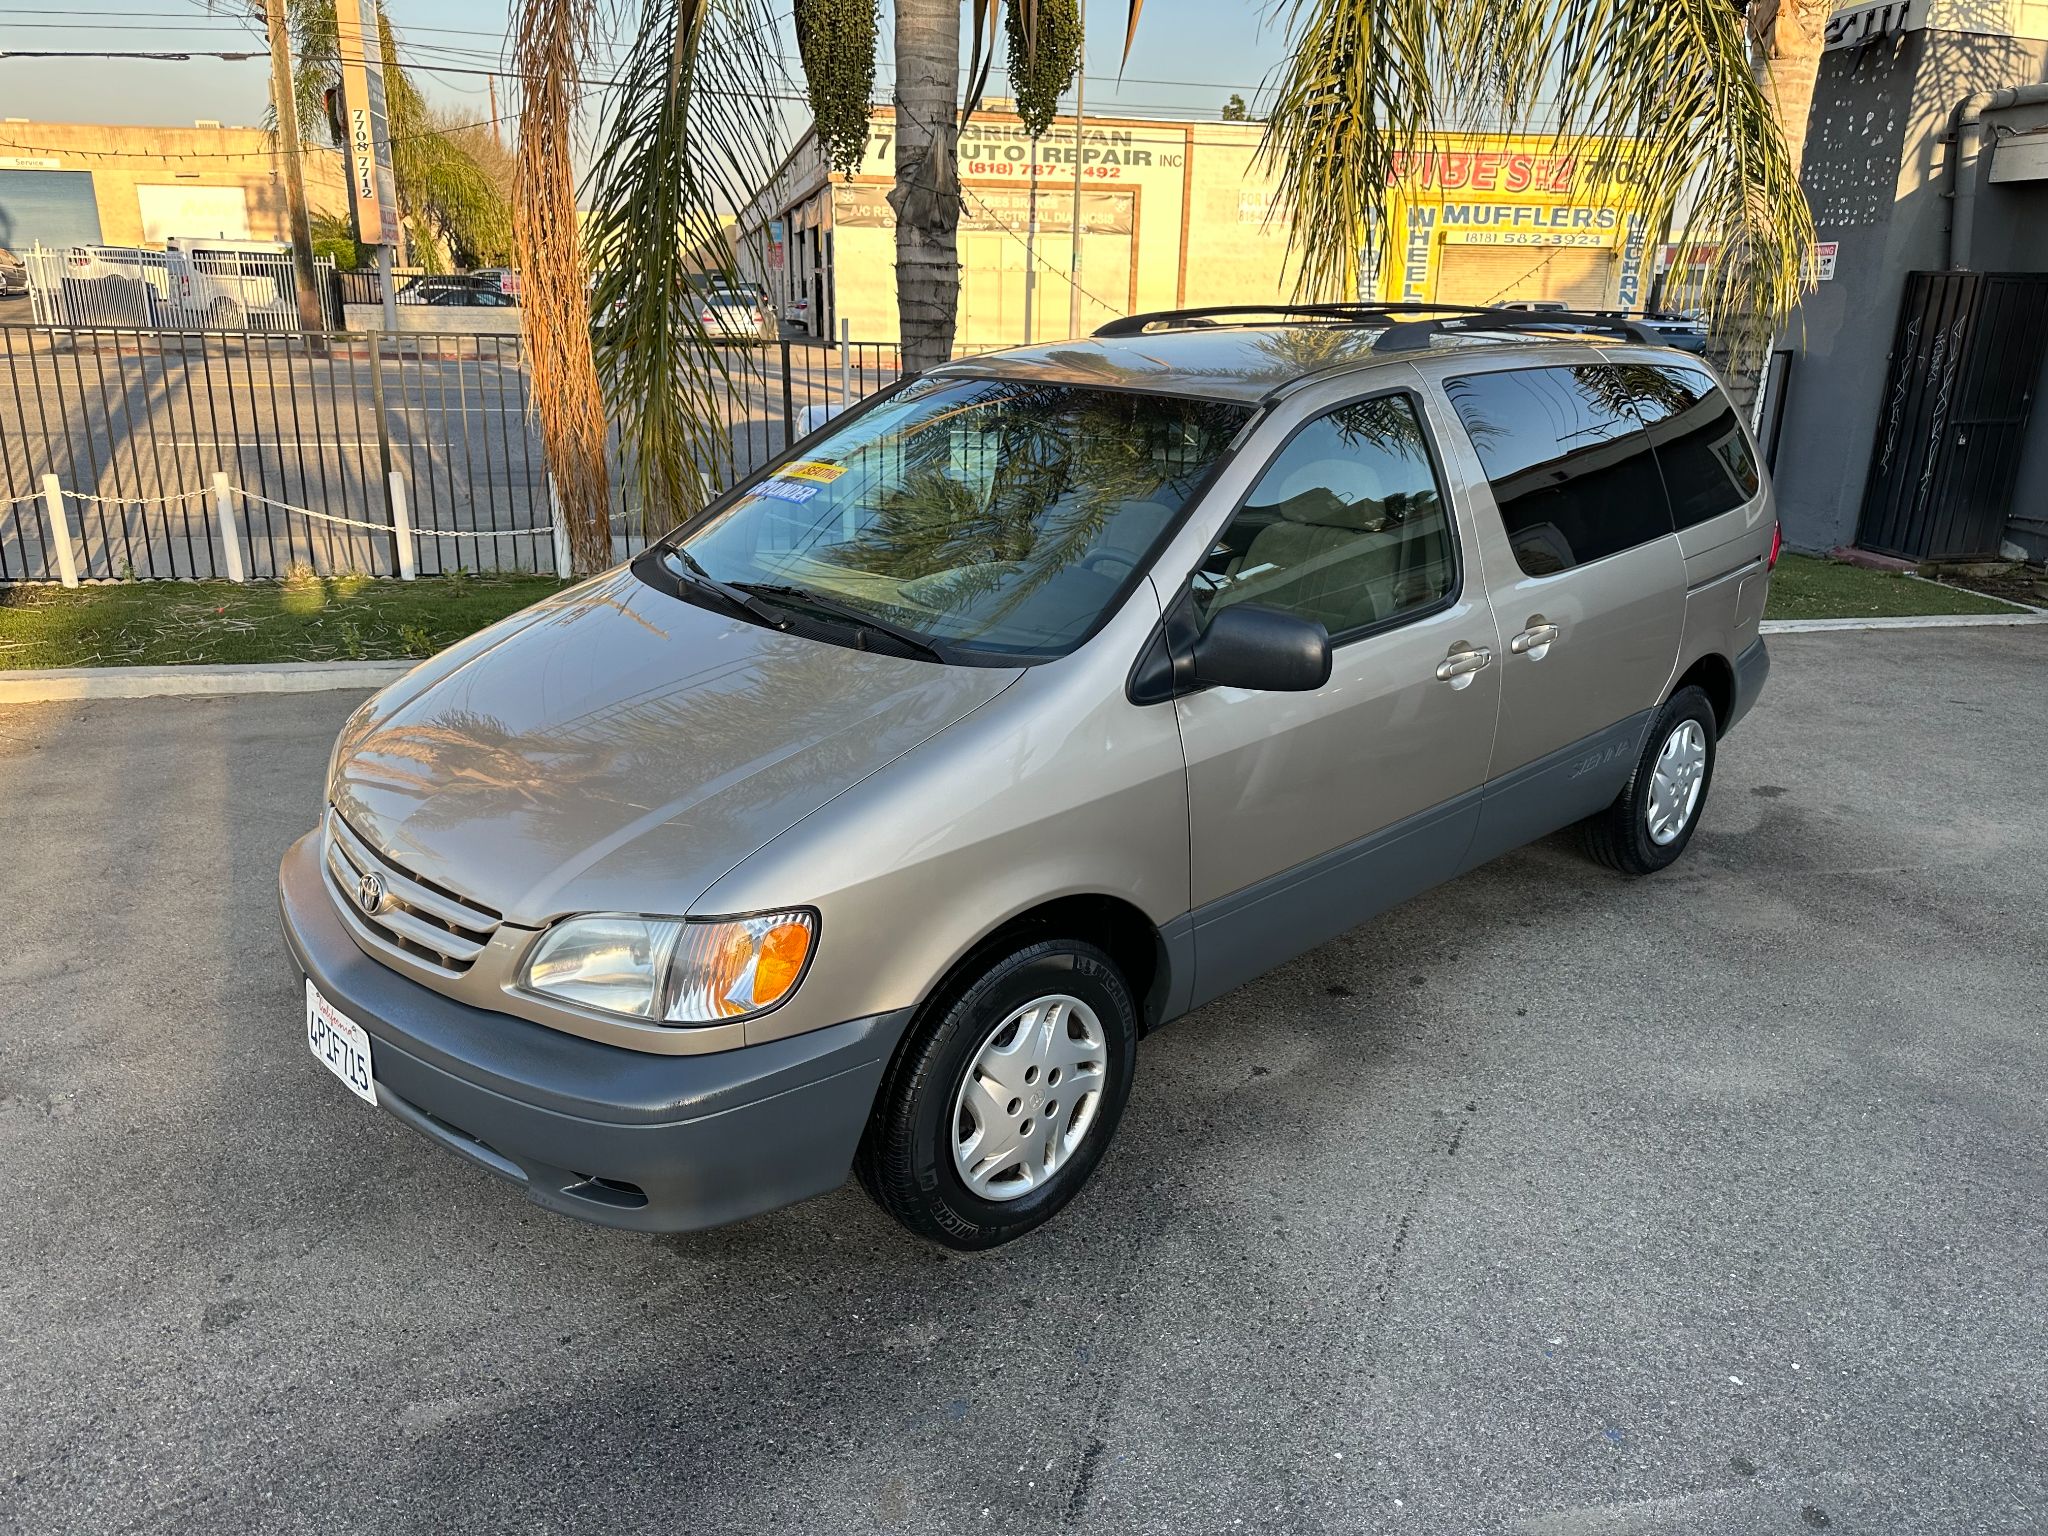 Used 2001 Toyota Sienna's nationwide for sale - MotorCloud